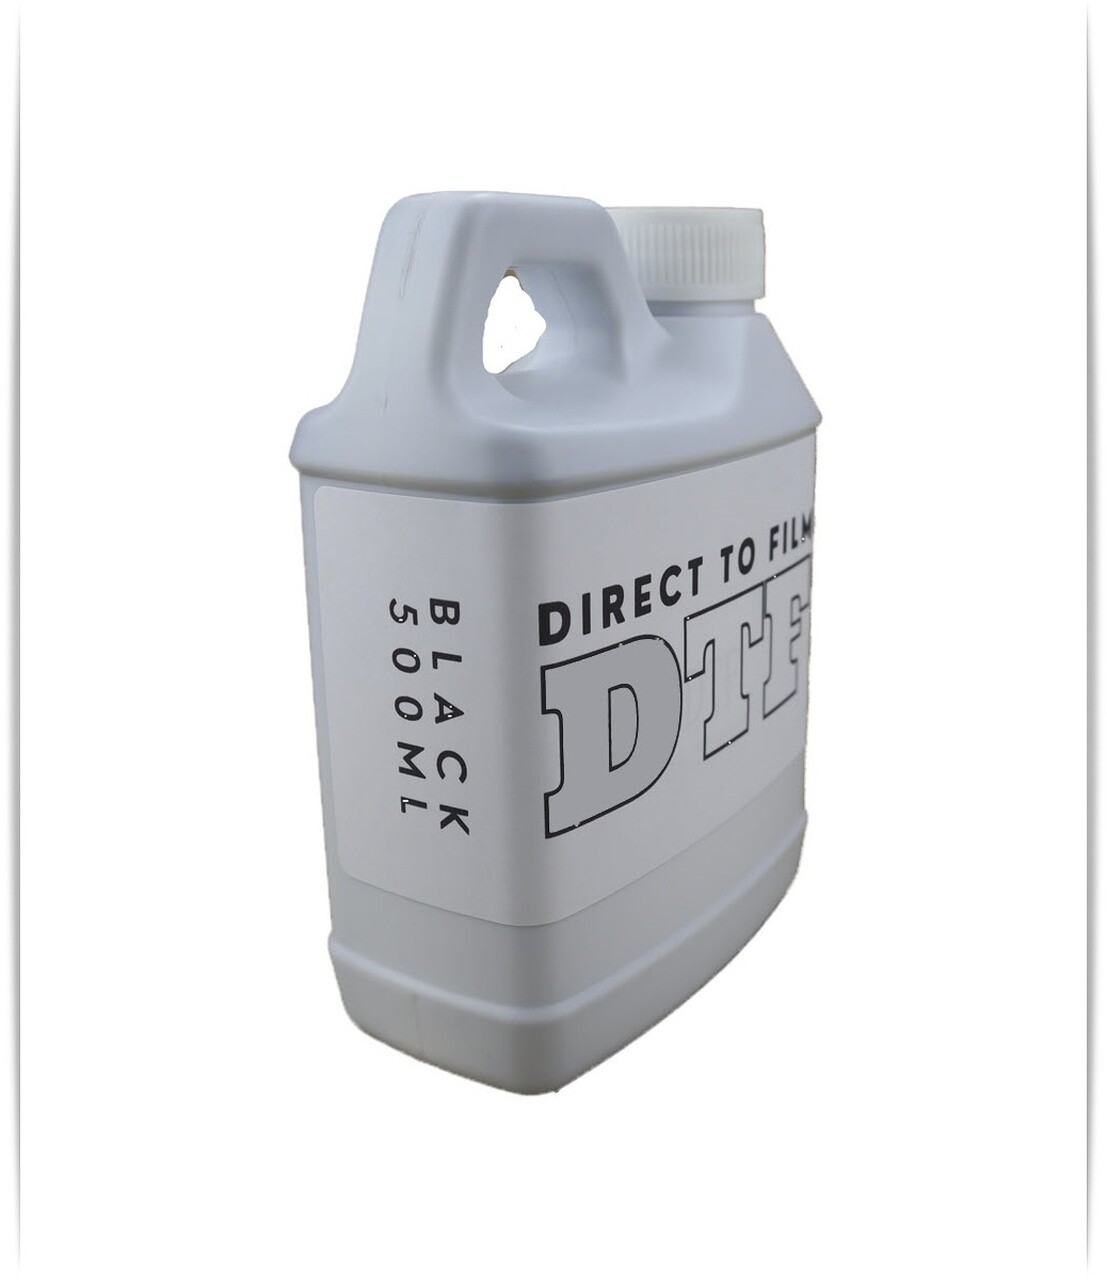 Black DTF Ink Direct To Film 500ml Bottle for Epson, Epson Print Head printers